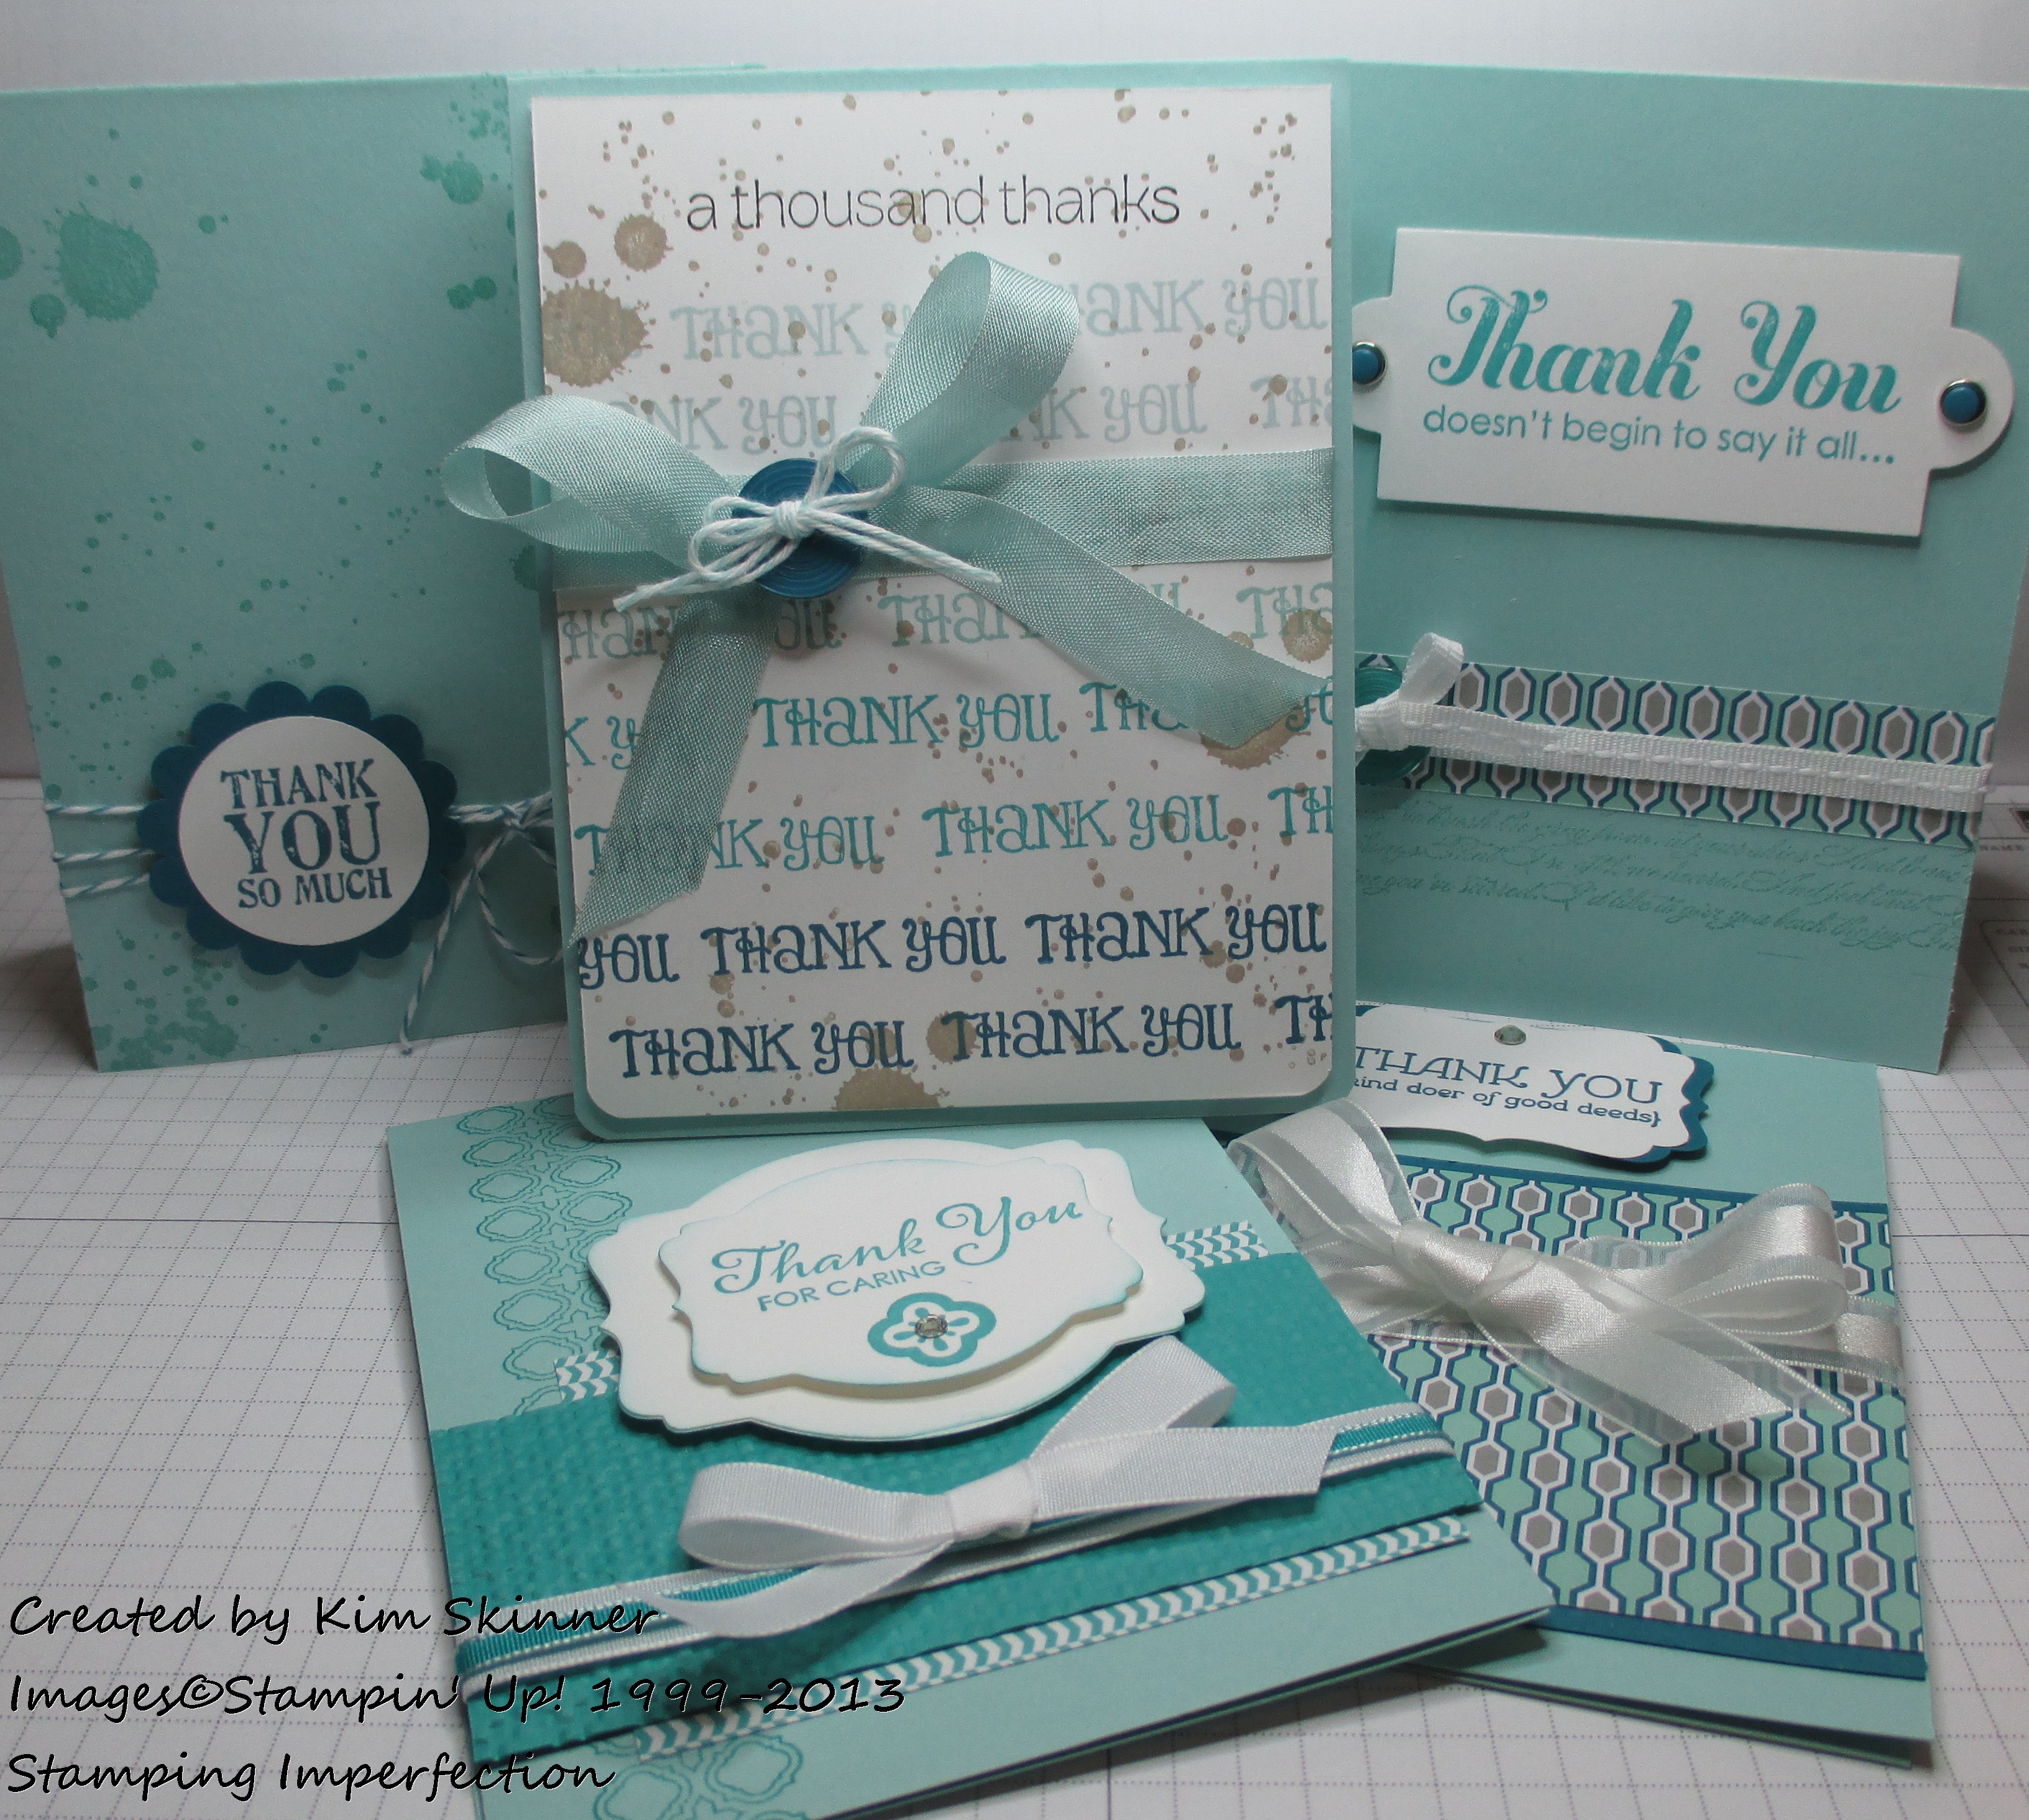 5 Thank You cards